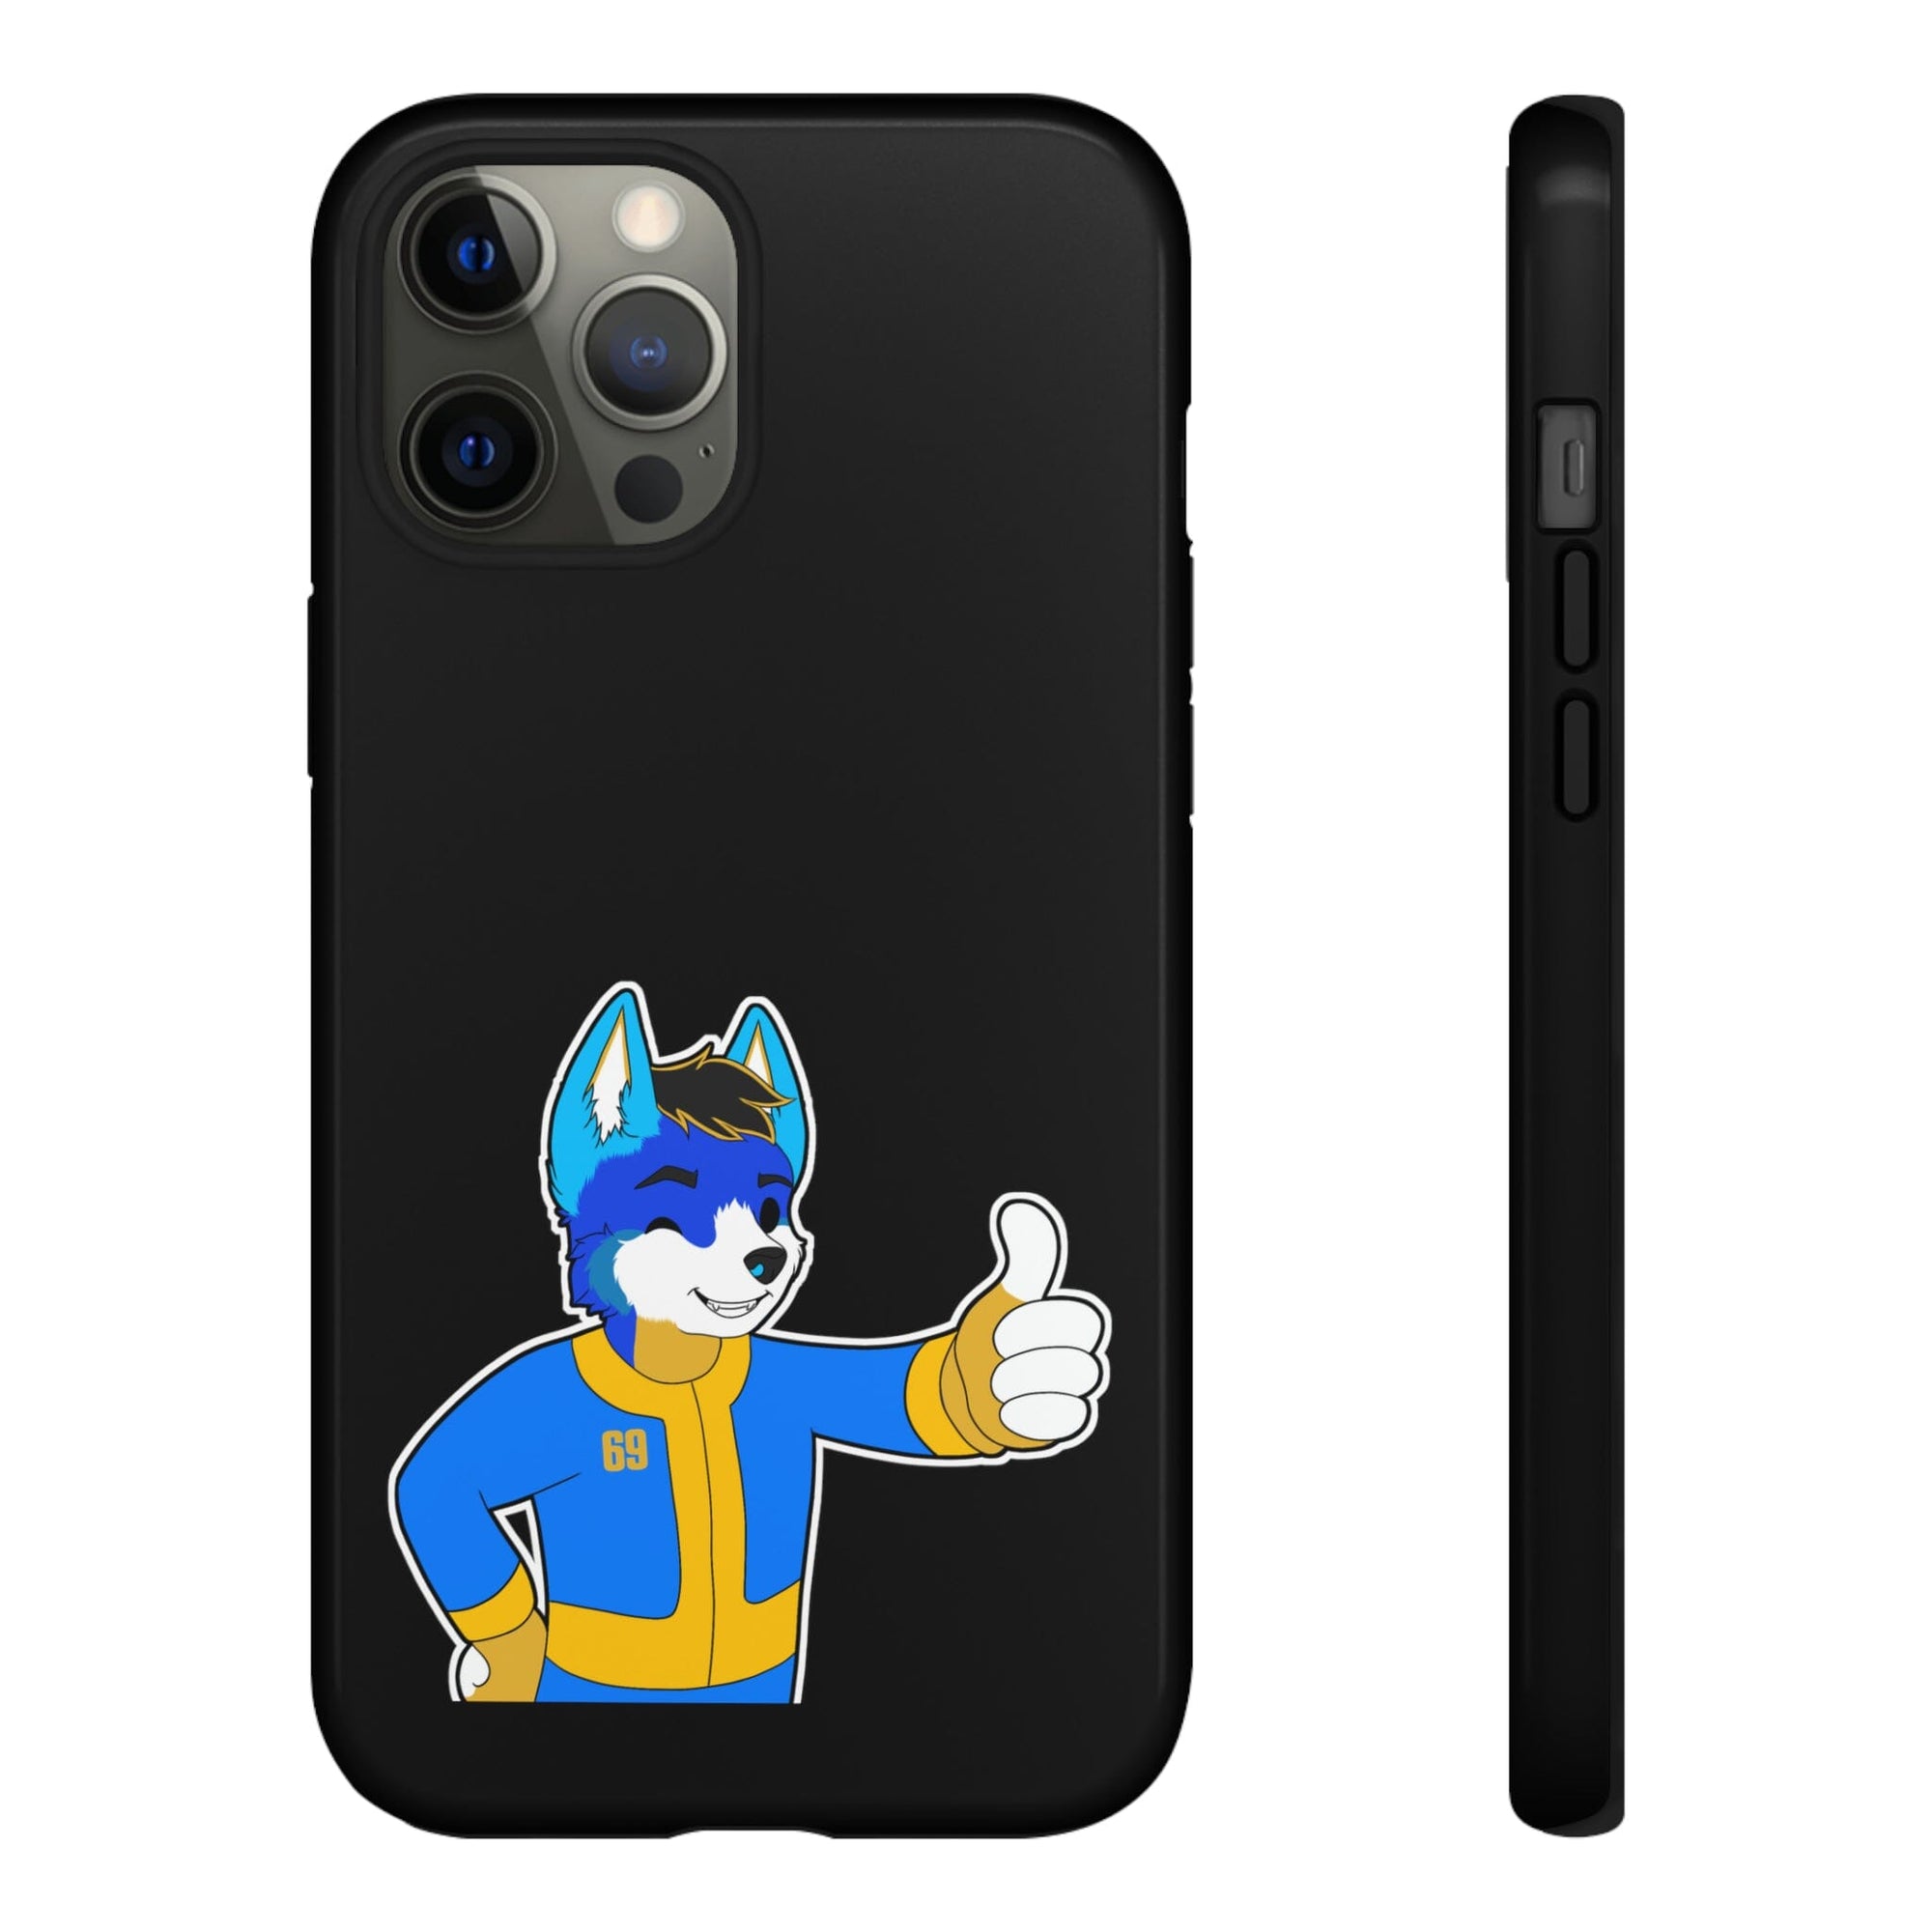 Hund The Hound - Fallout Hund - Phone Case Phone Case AFLT-Hund The Hound Glossy iPhone 12 Pro Max 